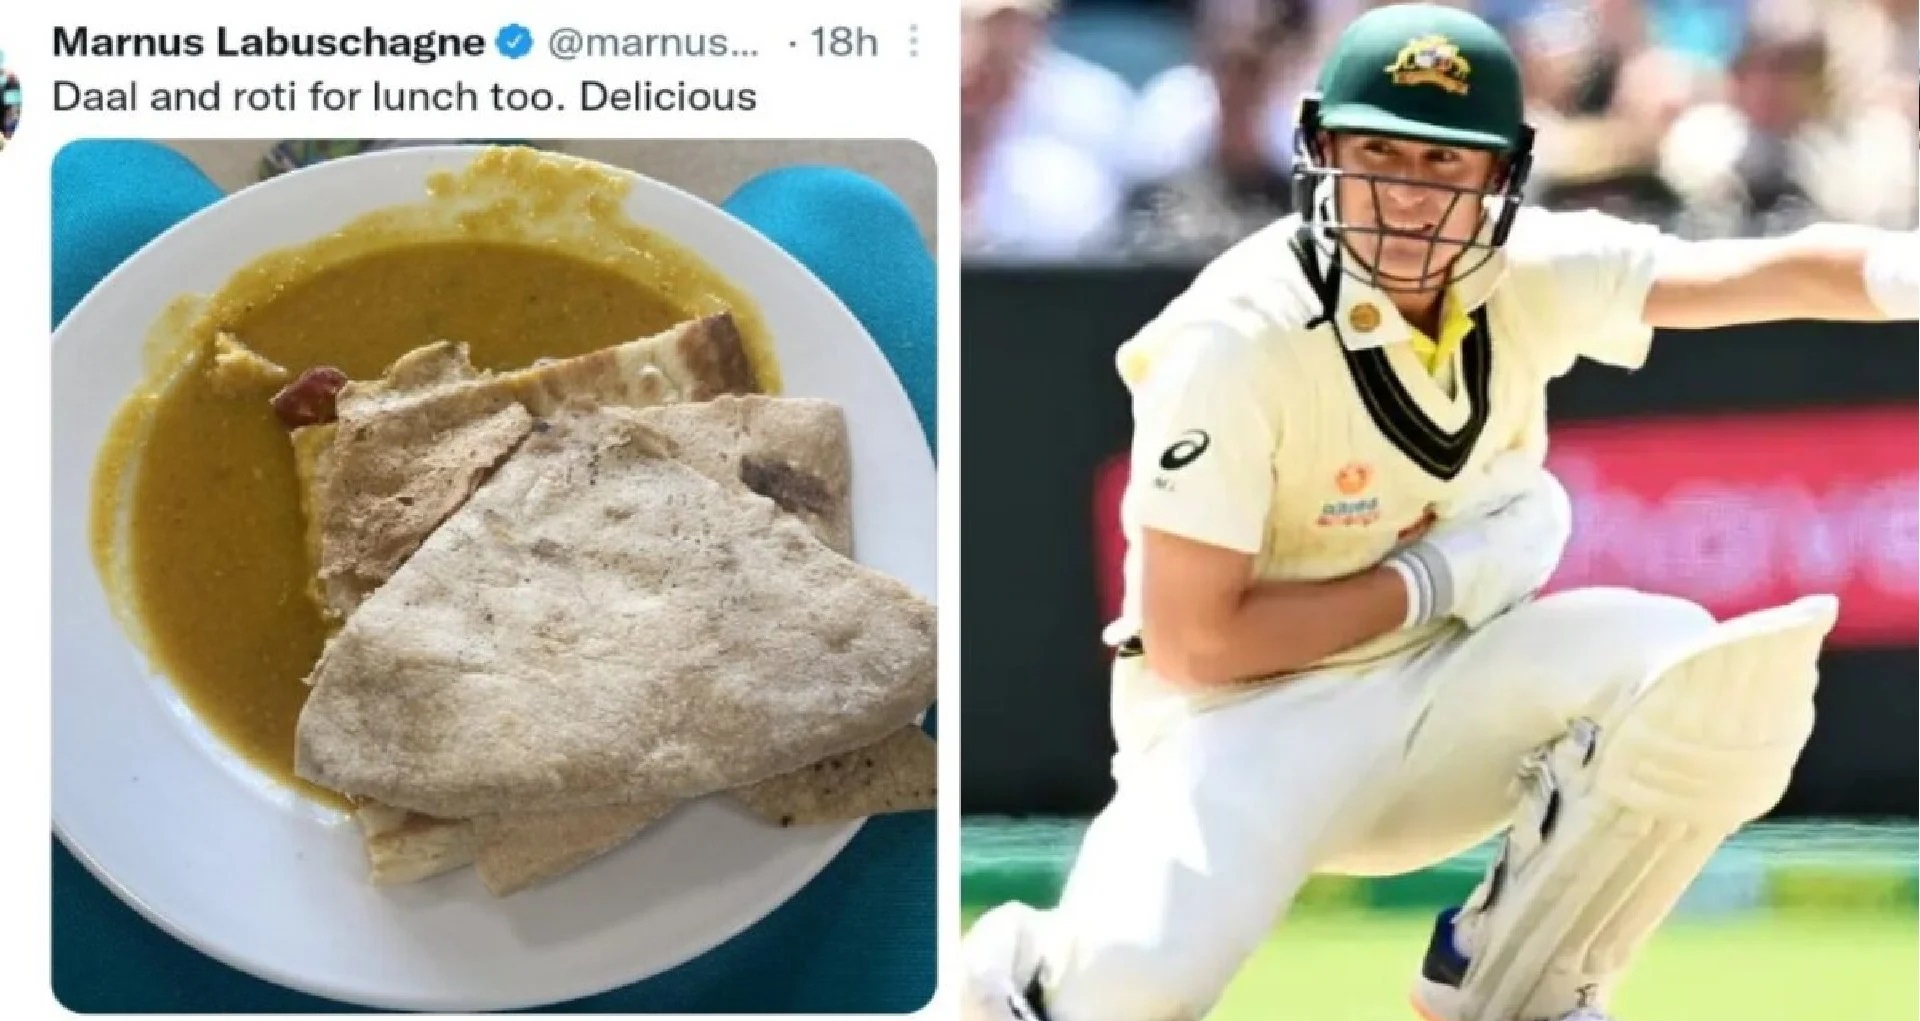 Marnus Labuschagne had shared photo of daal-roti served to Australian team during their tour | Twitter